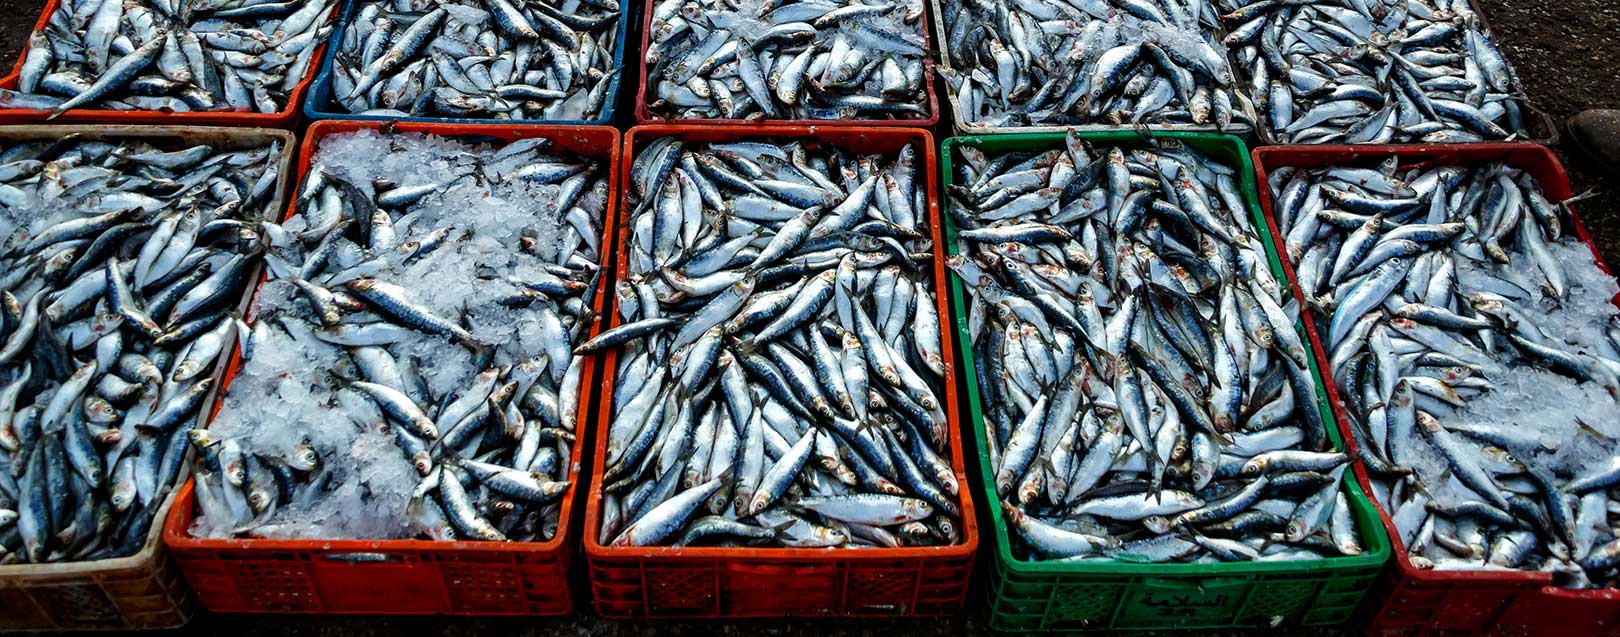 Seafood exports declines in FY2016-17 after seven years